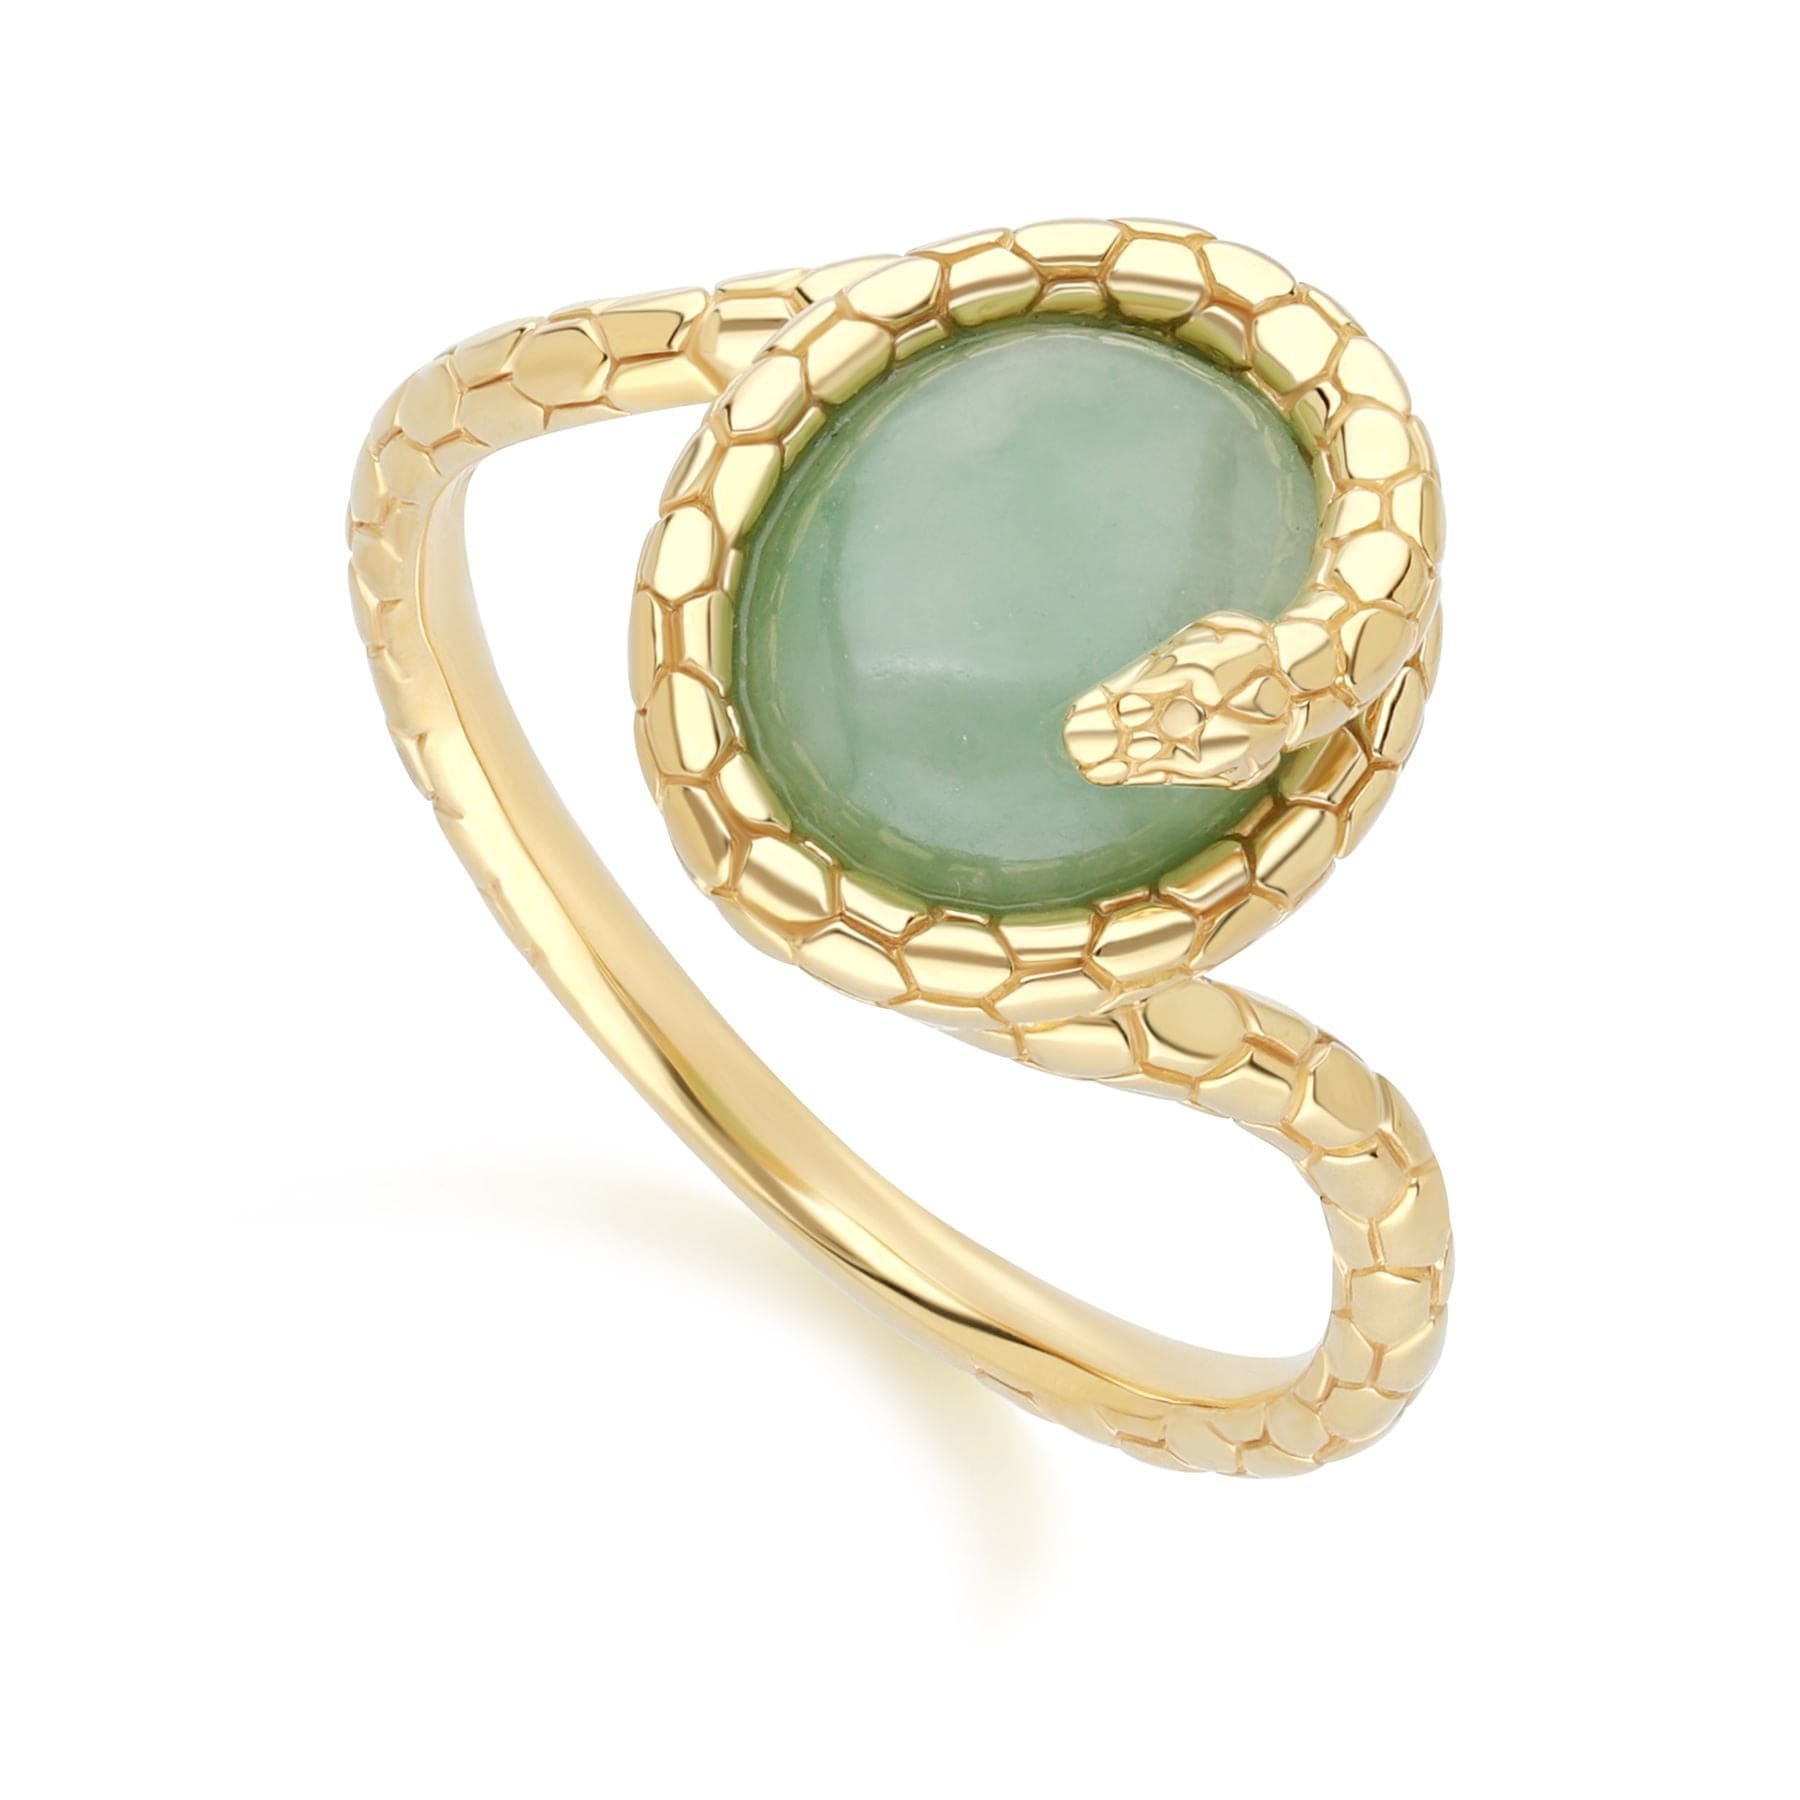 ECFEW™ JADE WINDING SNAKE RING IN GOLD PLATED STERLING SILVER